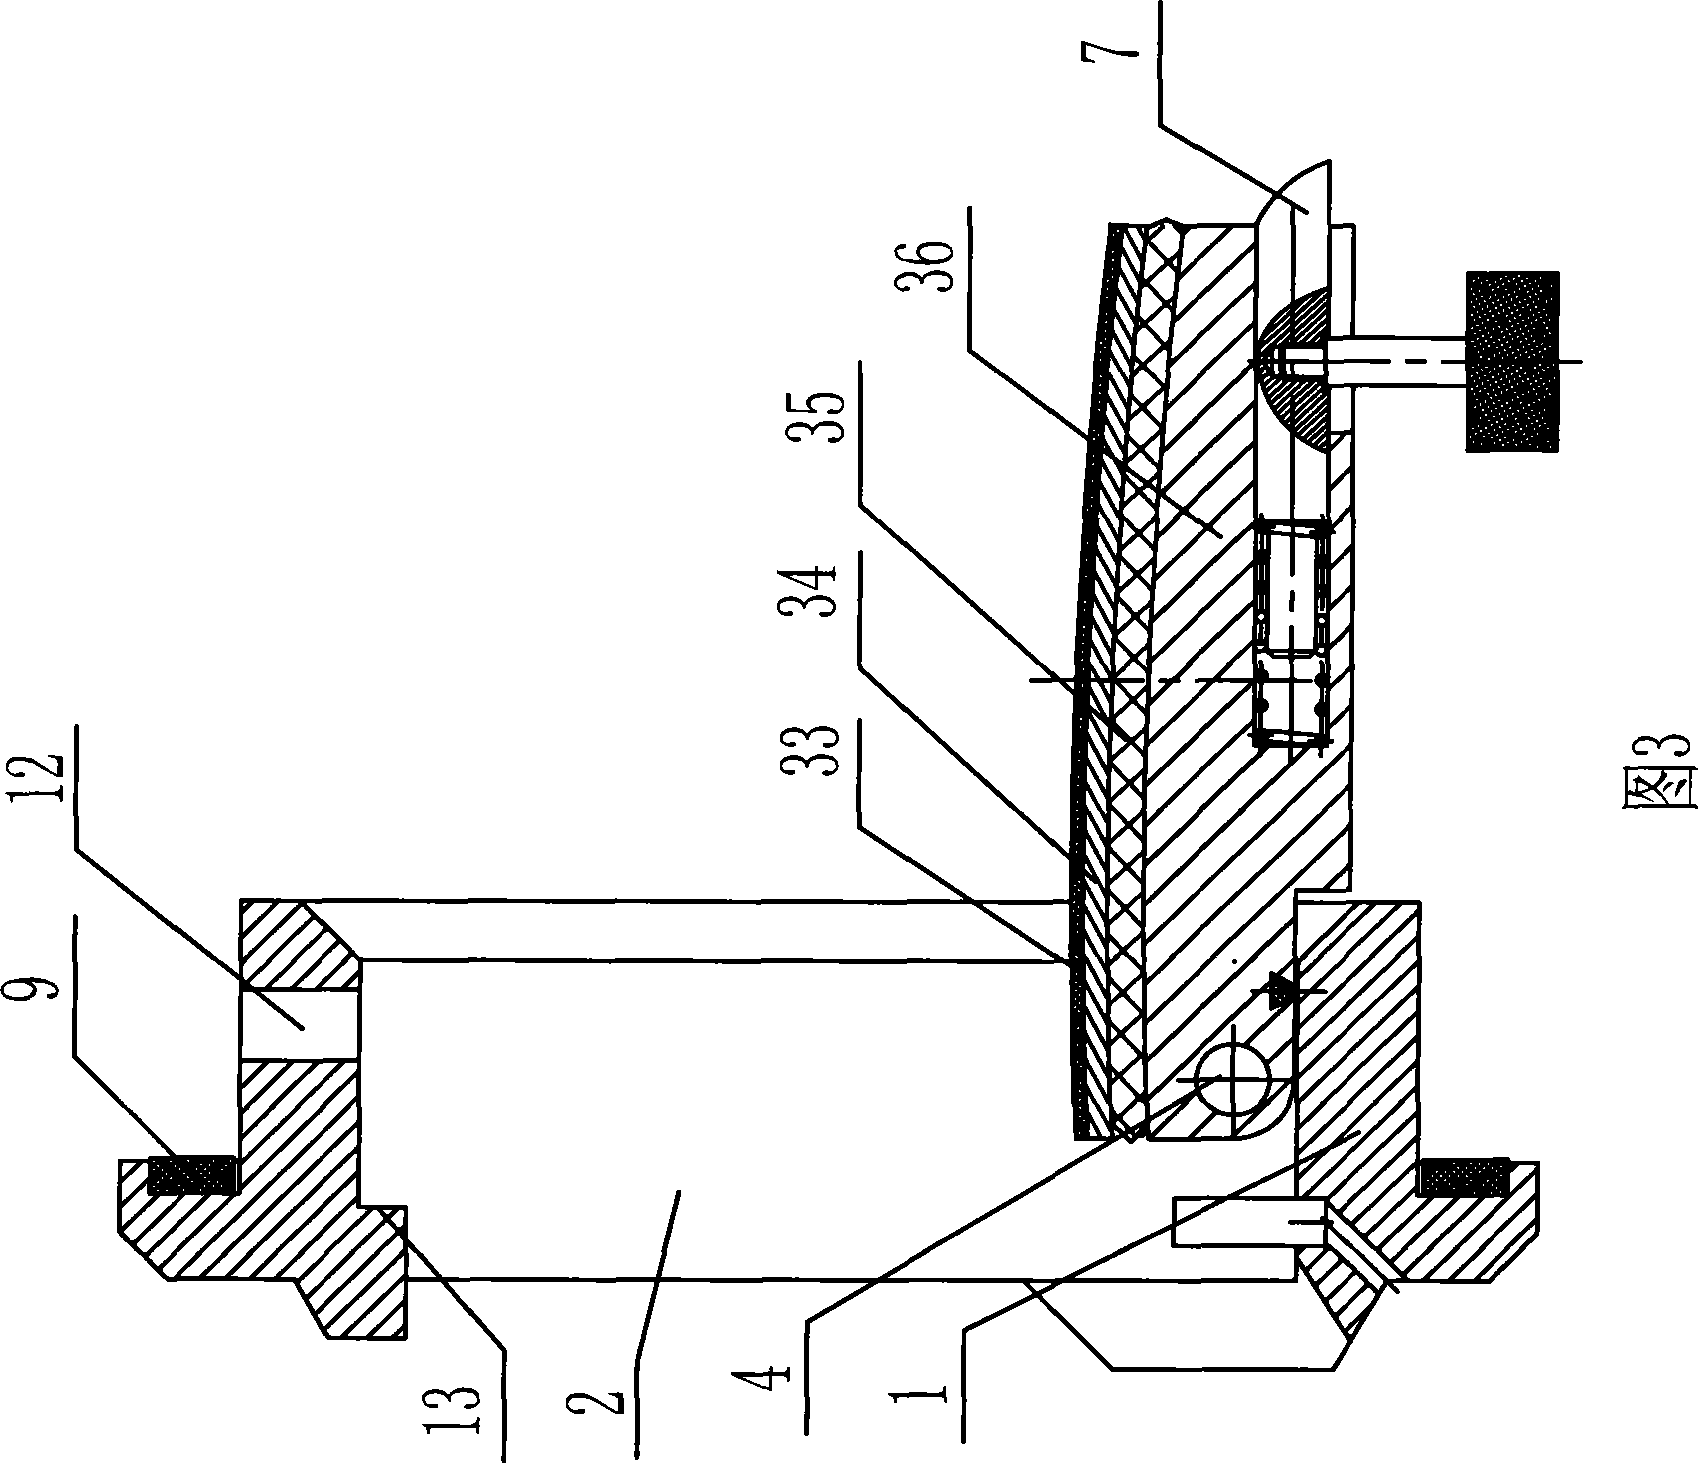 Embrasure structure on armored vehicle